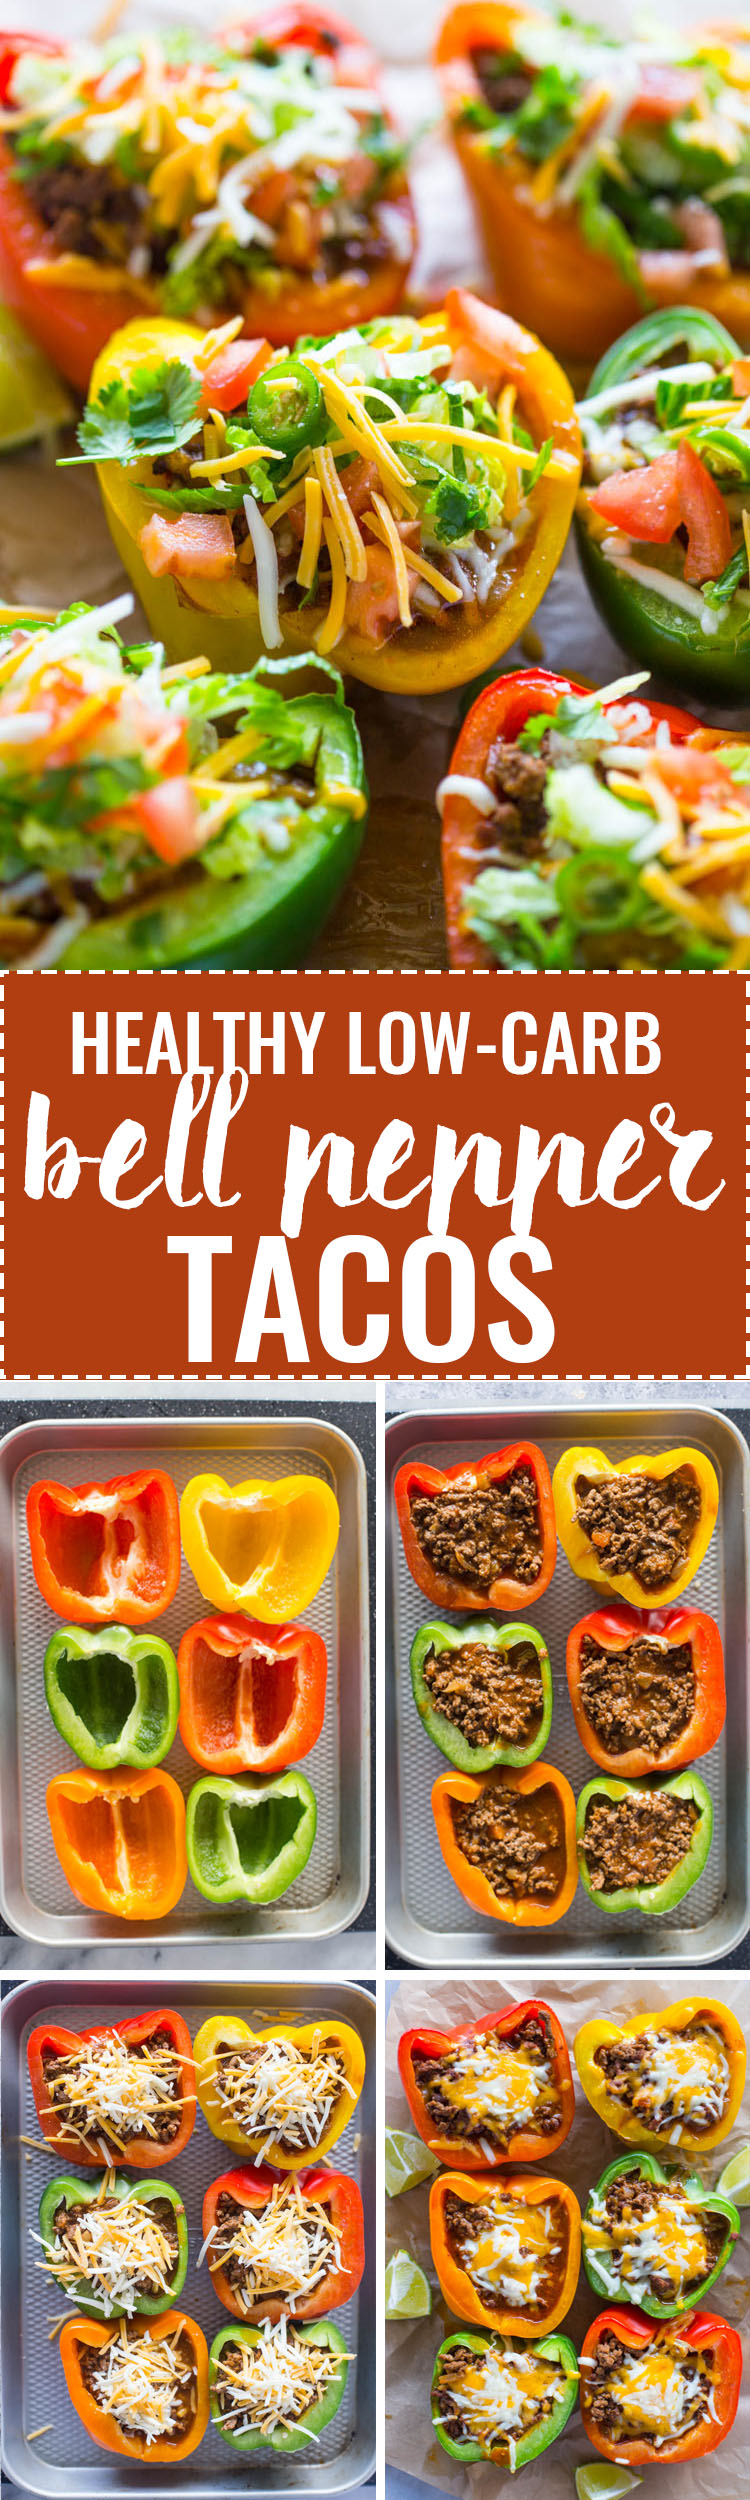 Skinny Low-Carb Bell Pepper Tacos